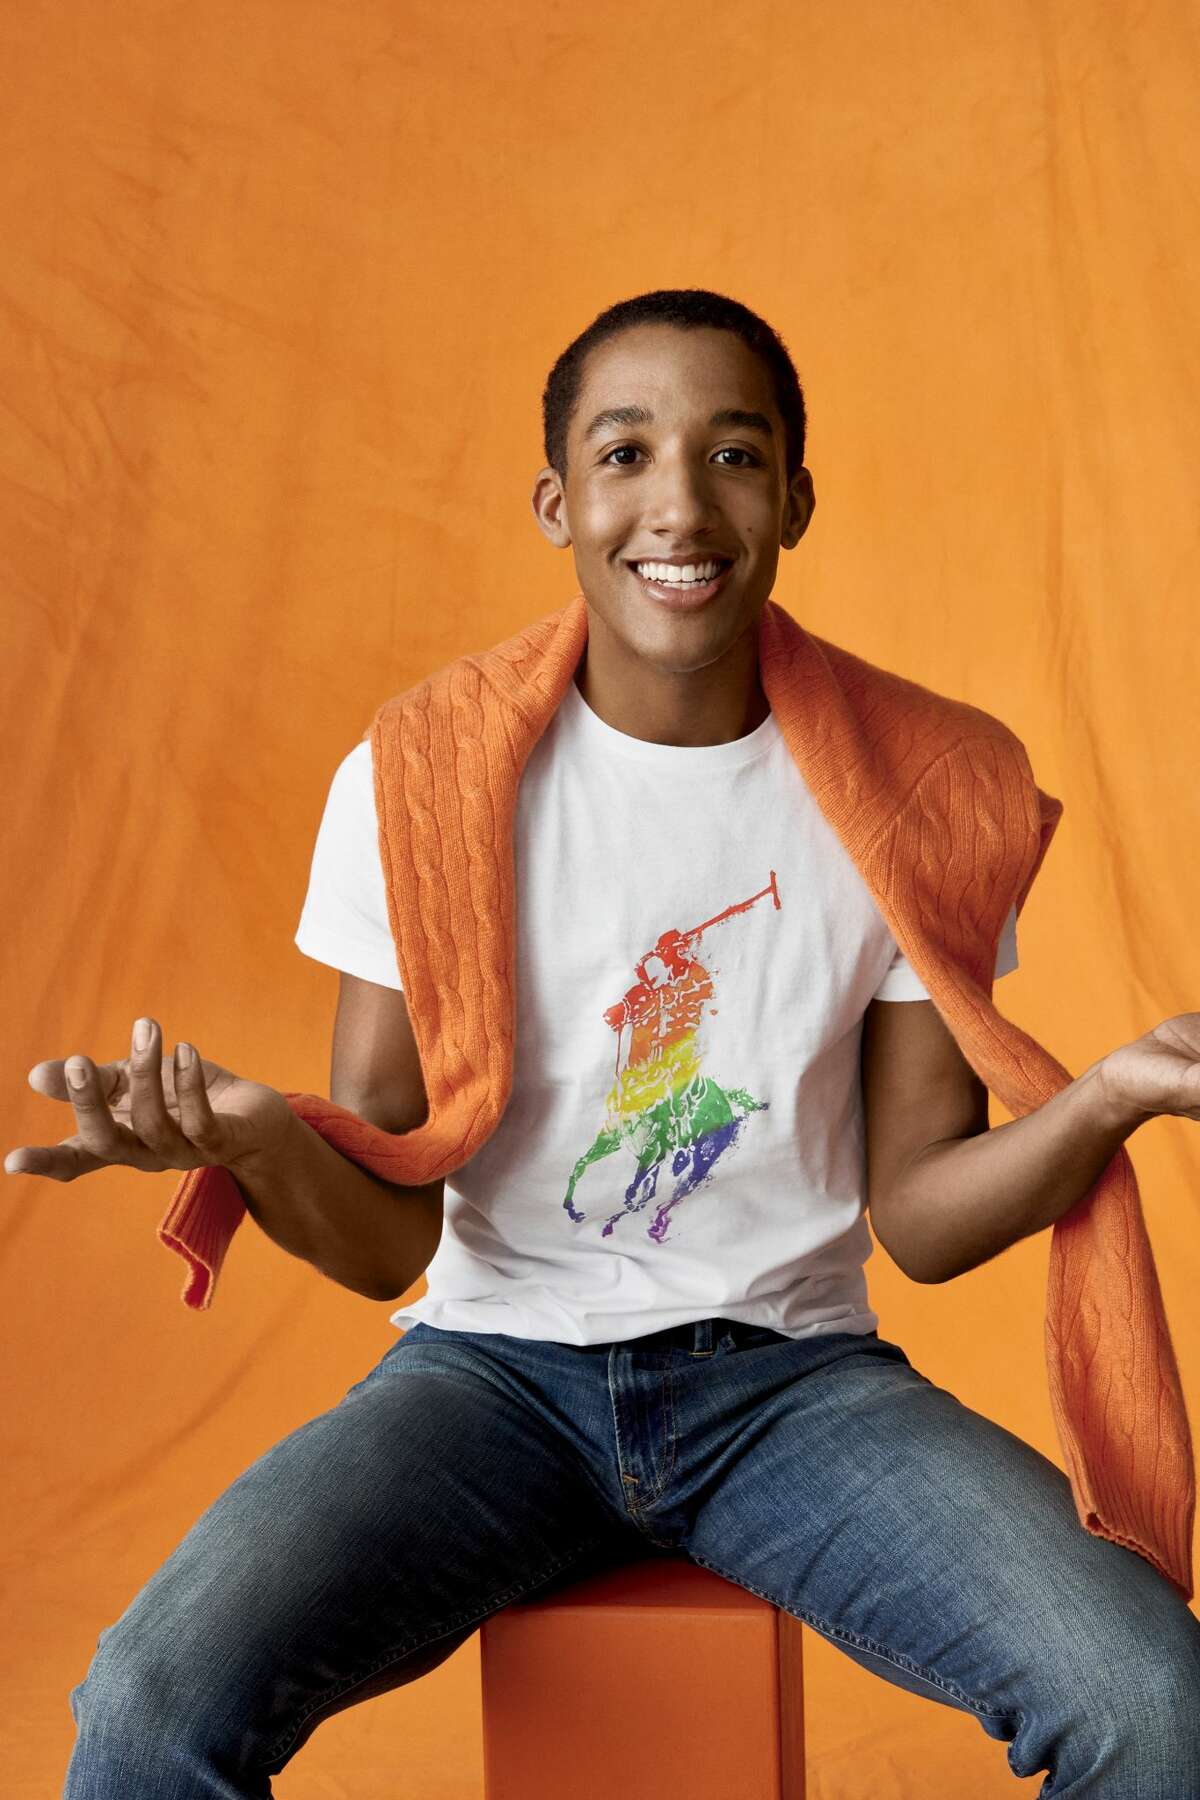 PRIDE: Houston Ballet's Harper Watters has been tapped for Ralph Lauren's marketing campaign for the company's new Pride capsule collection. The collection celebrates the LGBTQIA community and benefits Stonewall Community Foundation.